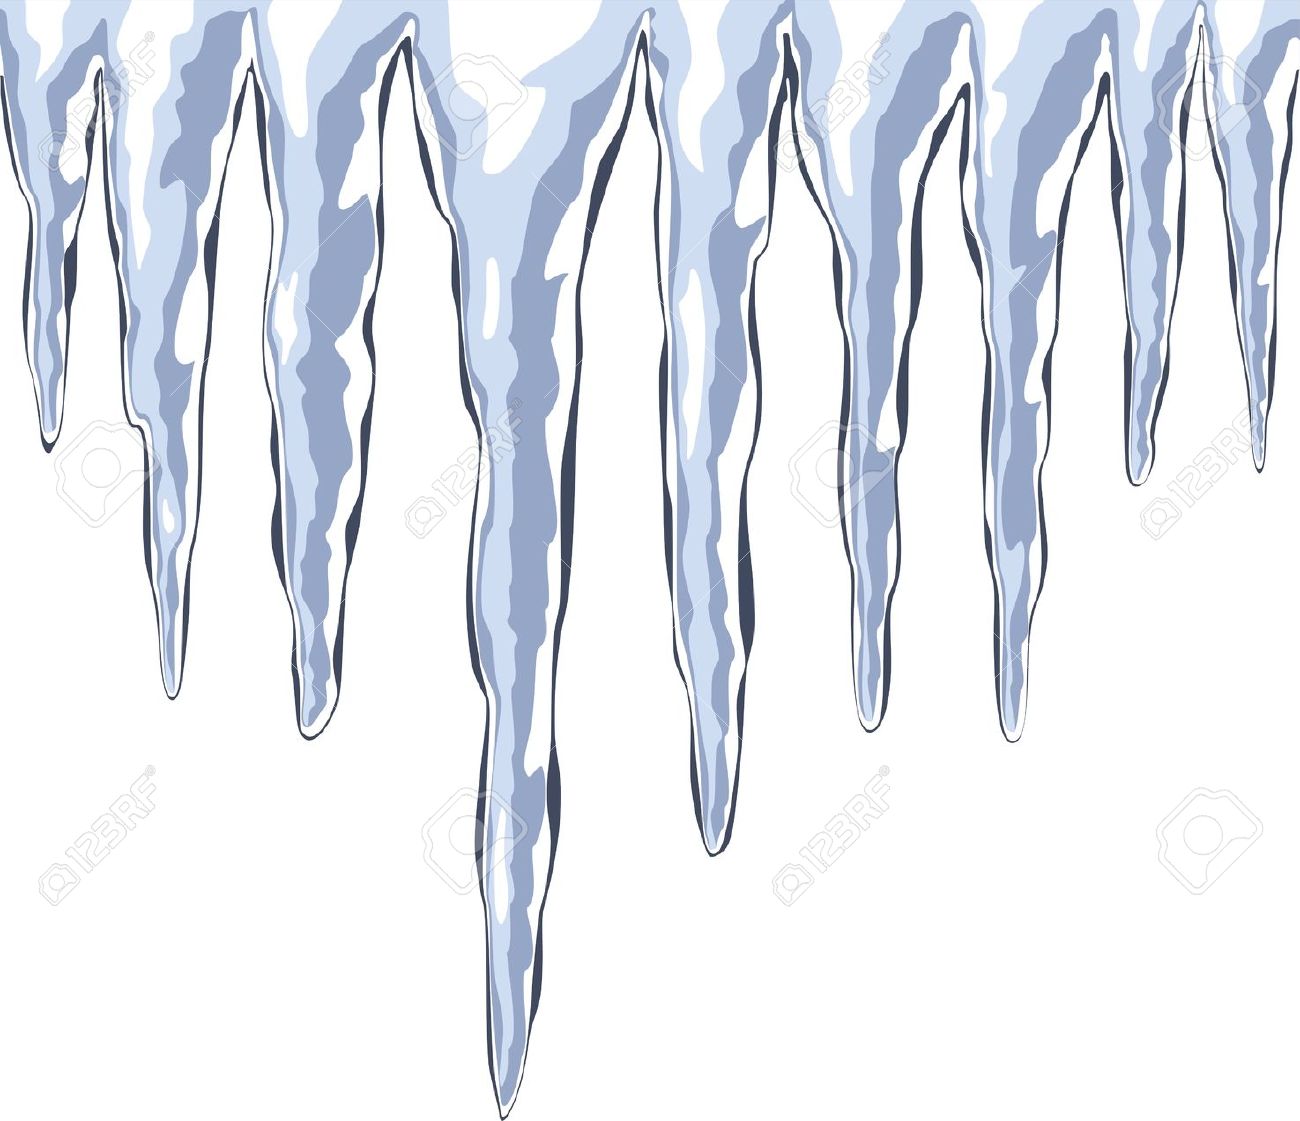 Icicle clipart #19, Download drawings